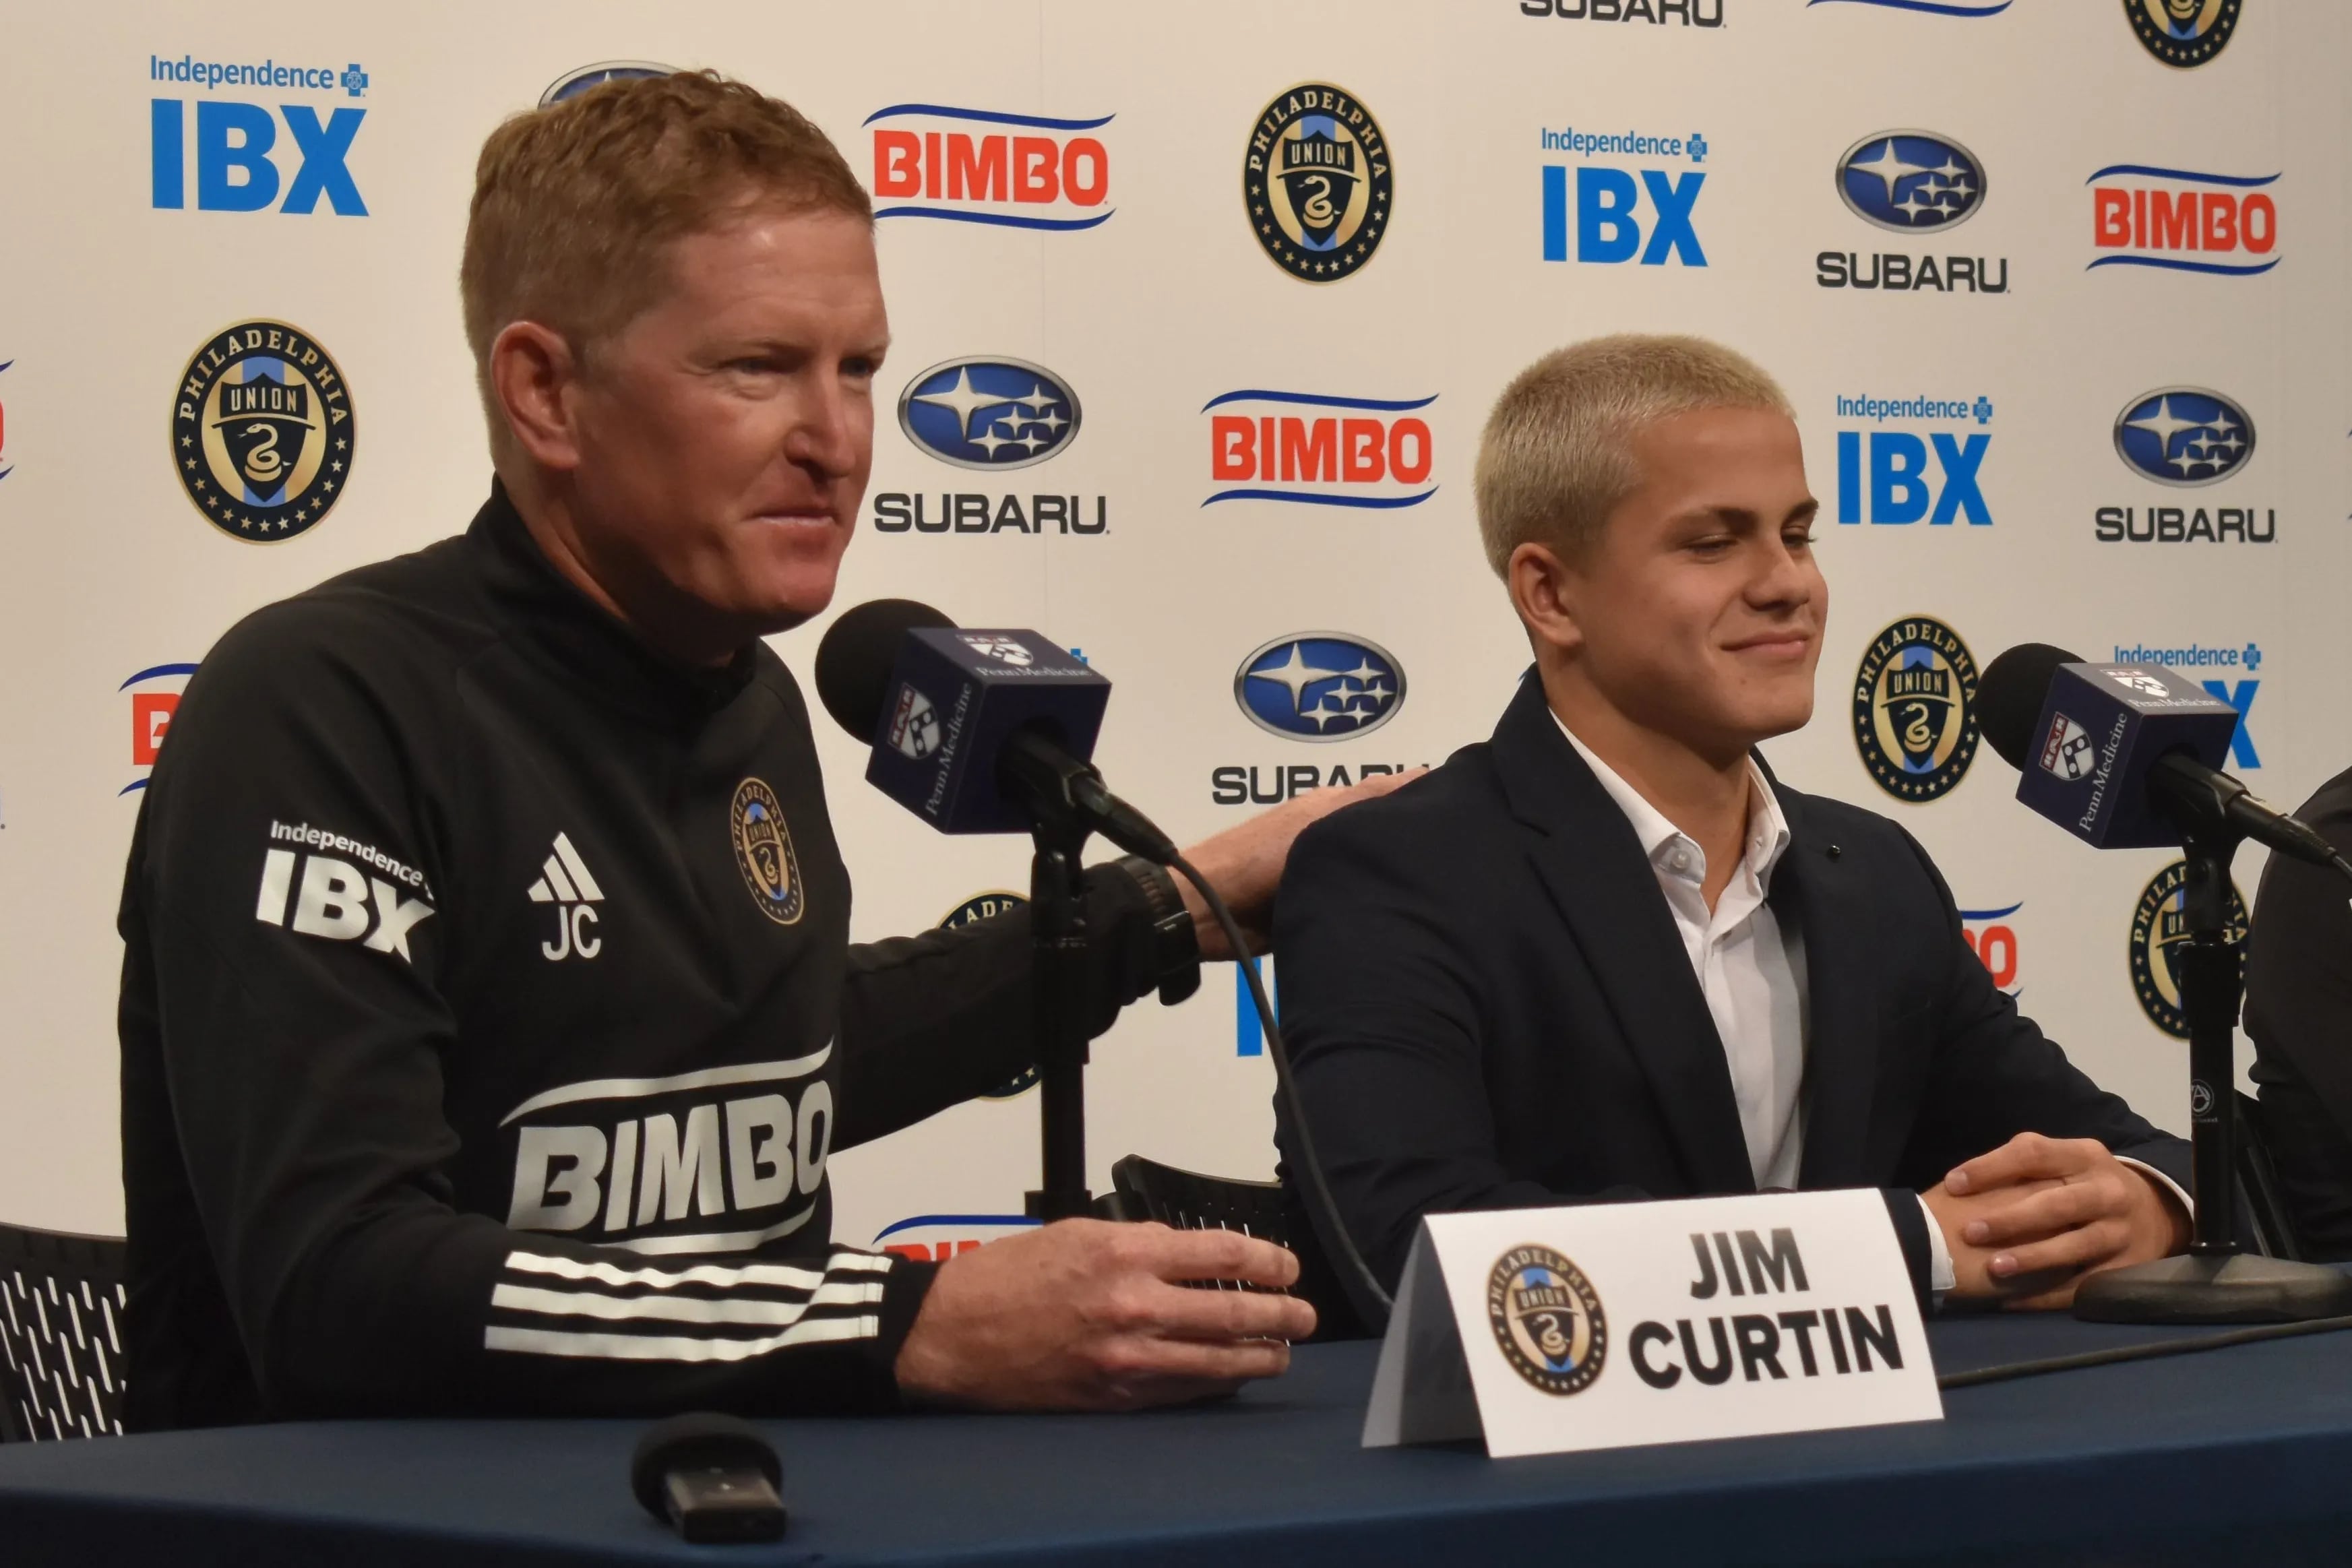 Union manager Jim Curtin (left) pats Cavan Sullivan on the back during Thursday's news conference at Subaru Park.